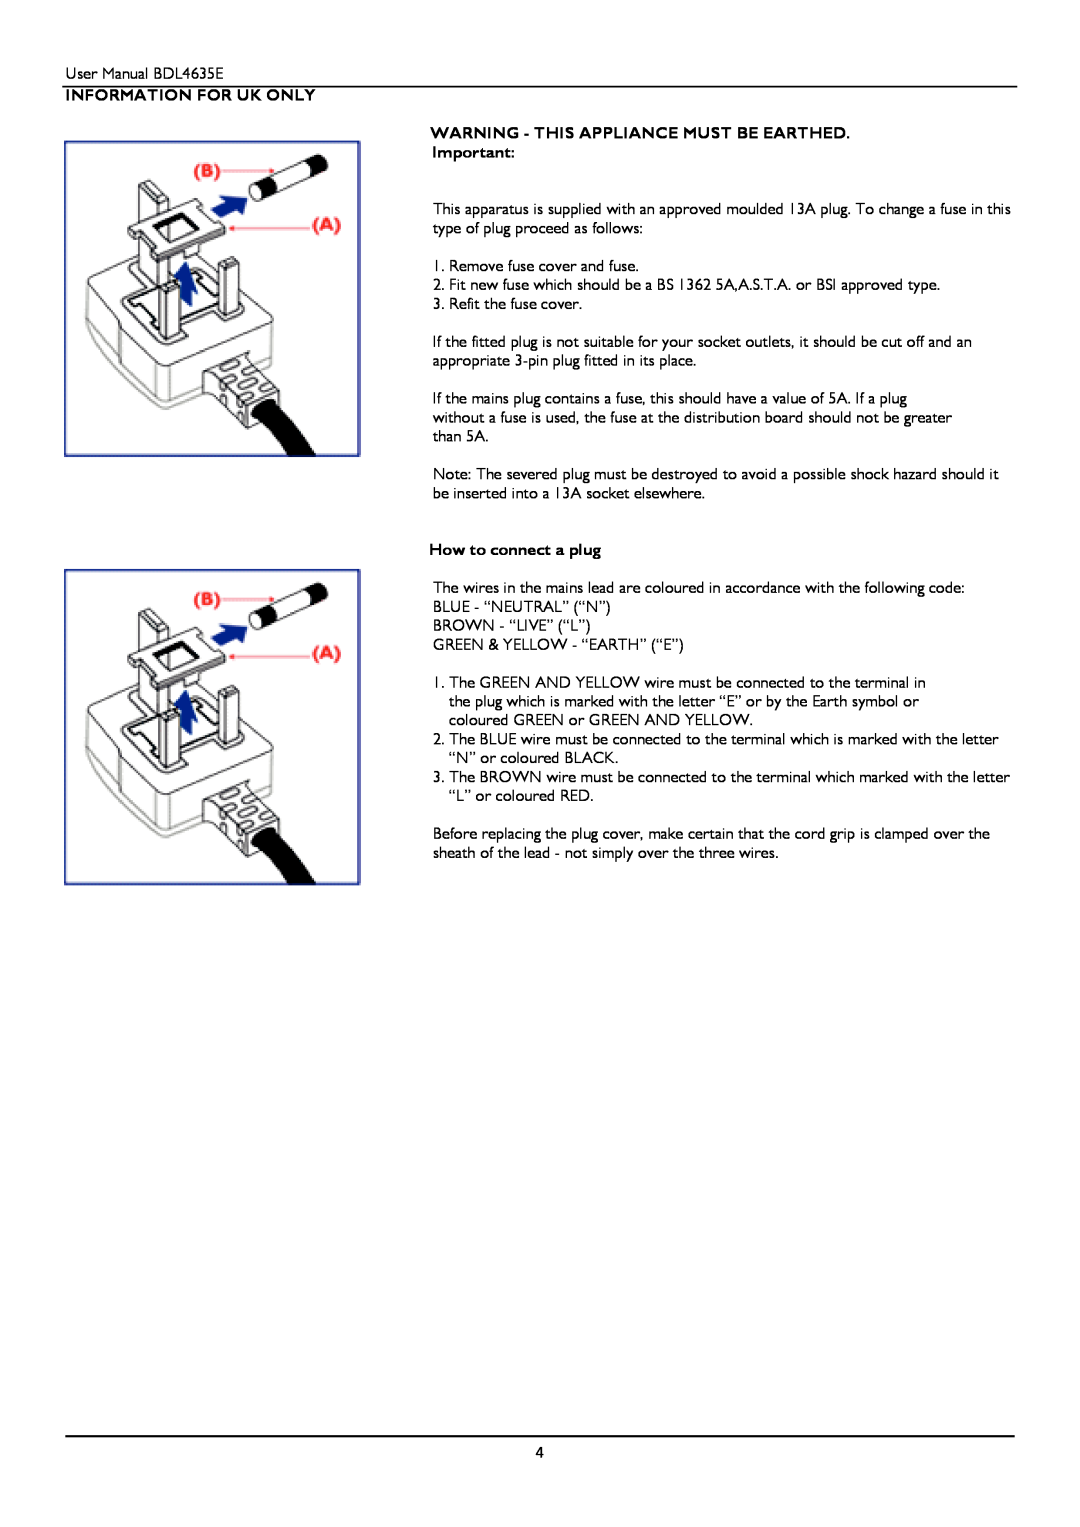 Philips BDL4635E/00 user manual Information For Uk Only, Warning - This Appliance Must Be Earthed, How to connect a plug 